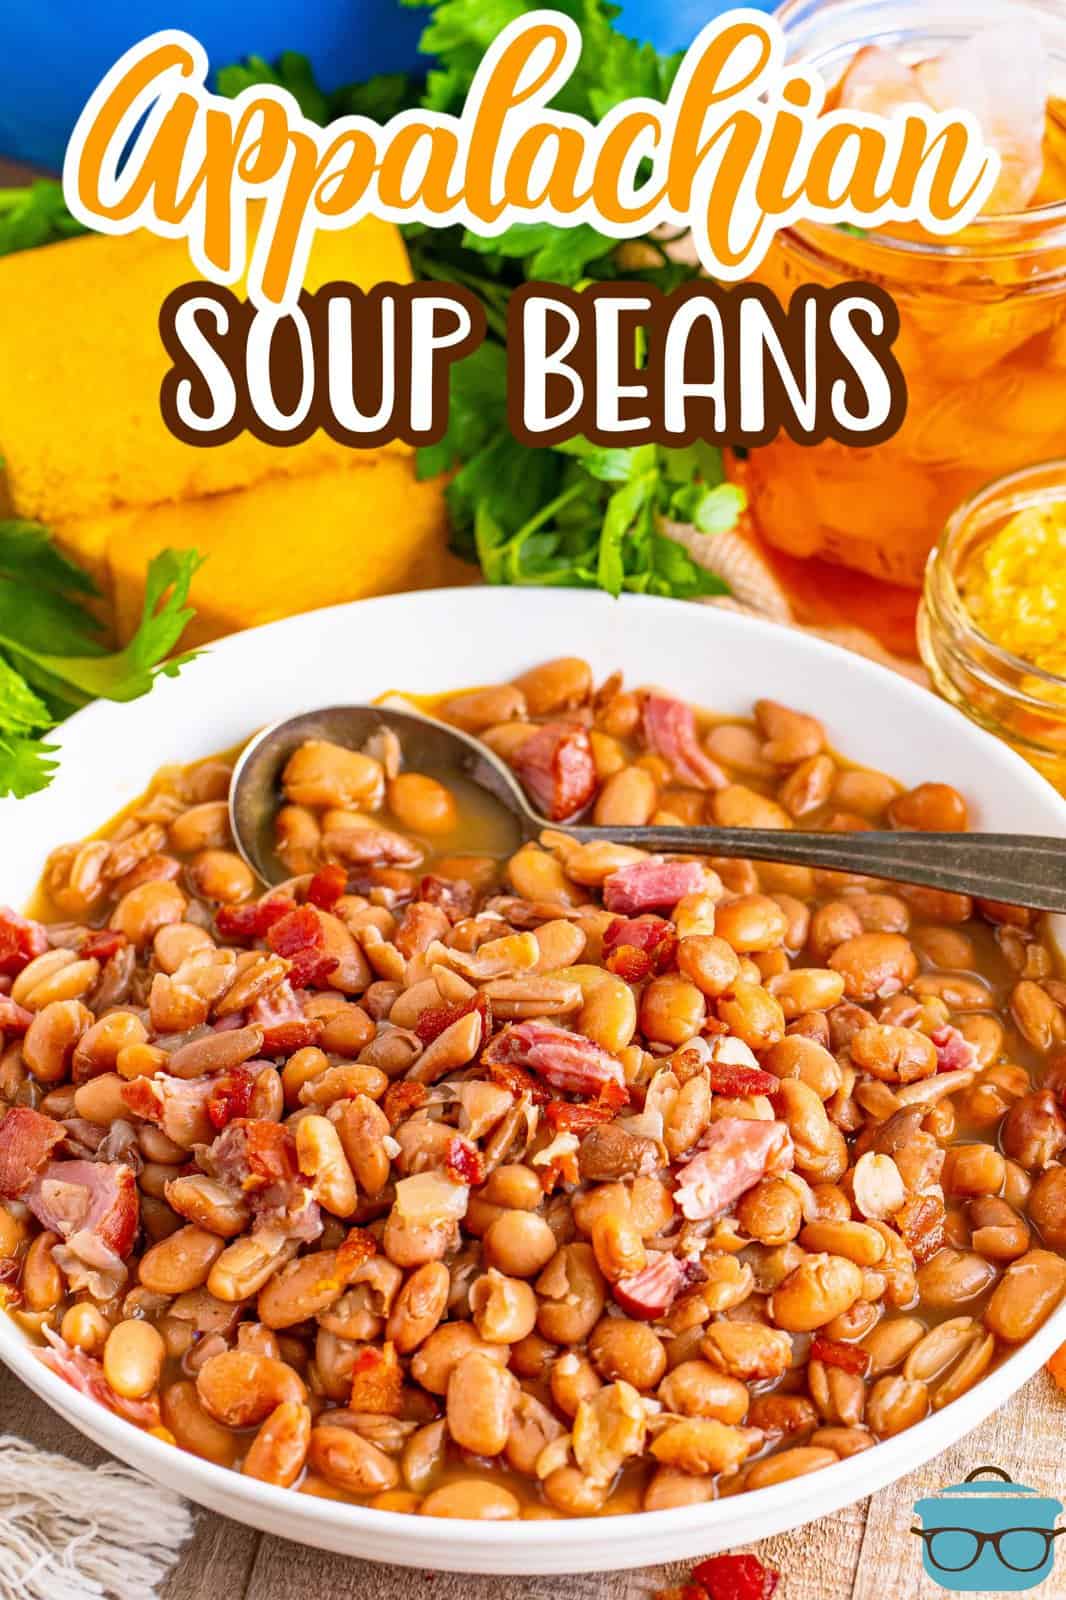 A large white bowl of Soup Beans with a spoon in it.